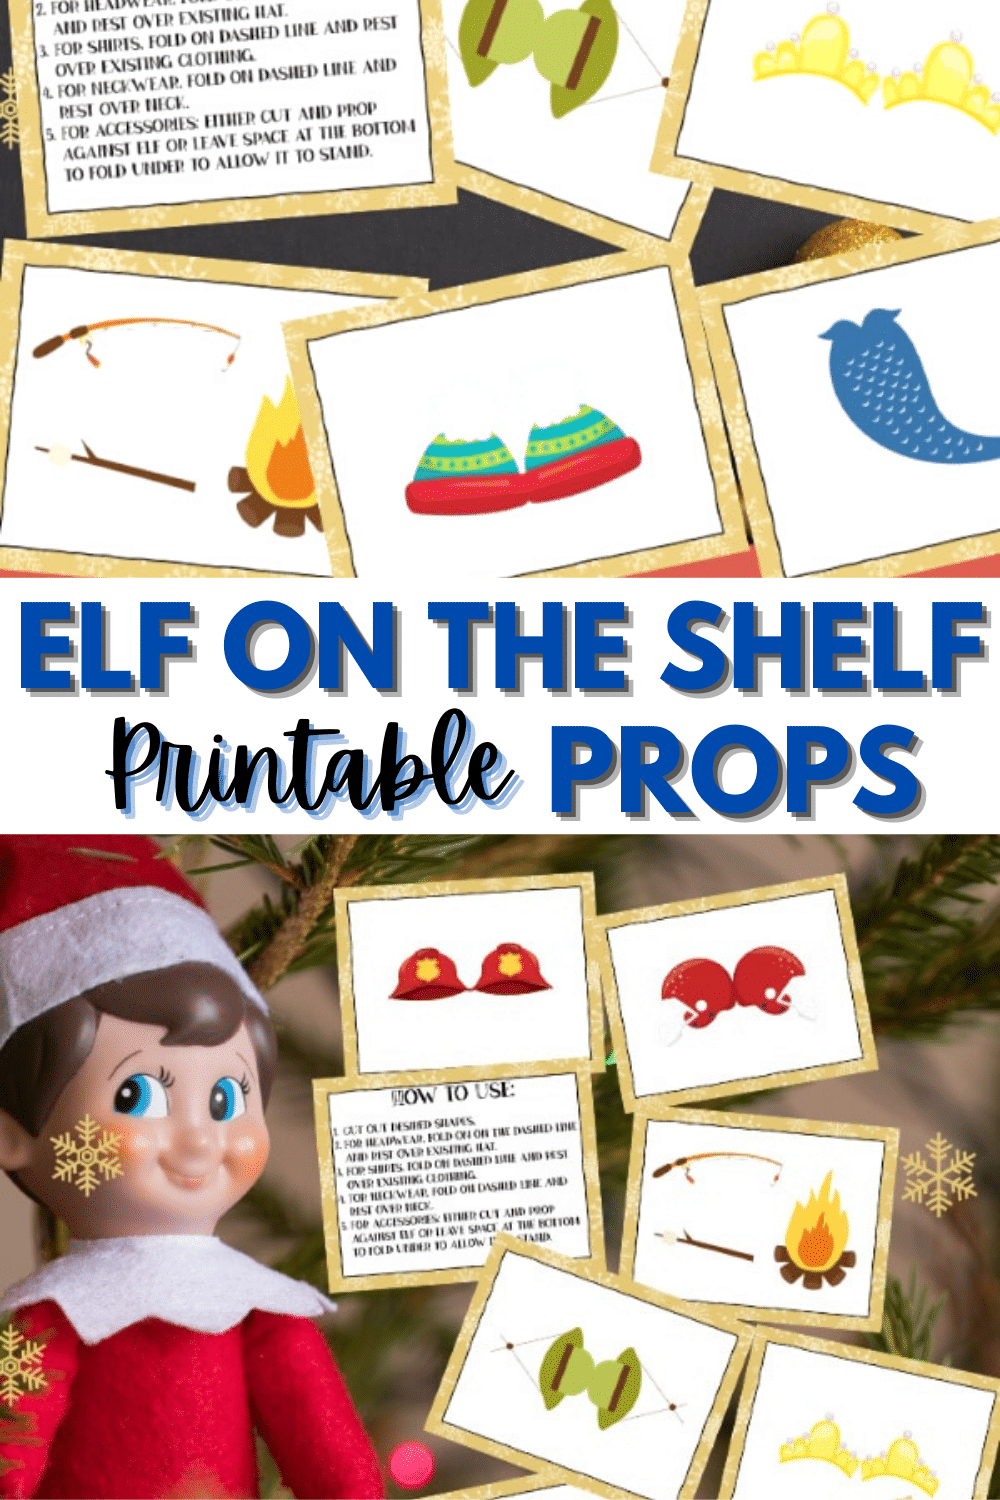 These Elf on the Shelf Printable Props will make life easier for parents and kids will love the new costumes and accessories their elf has on. #elfontheshelf #christmas #printables via @wondermomwannab